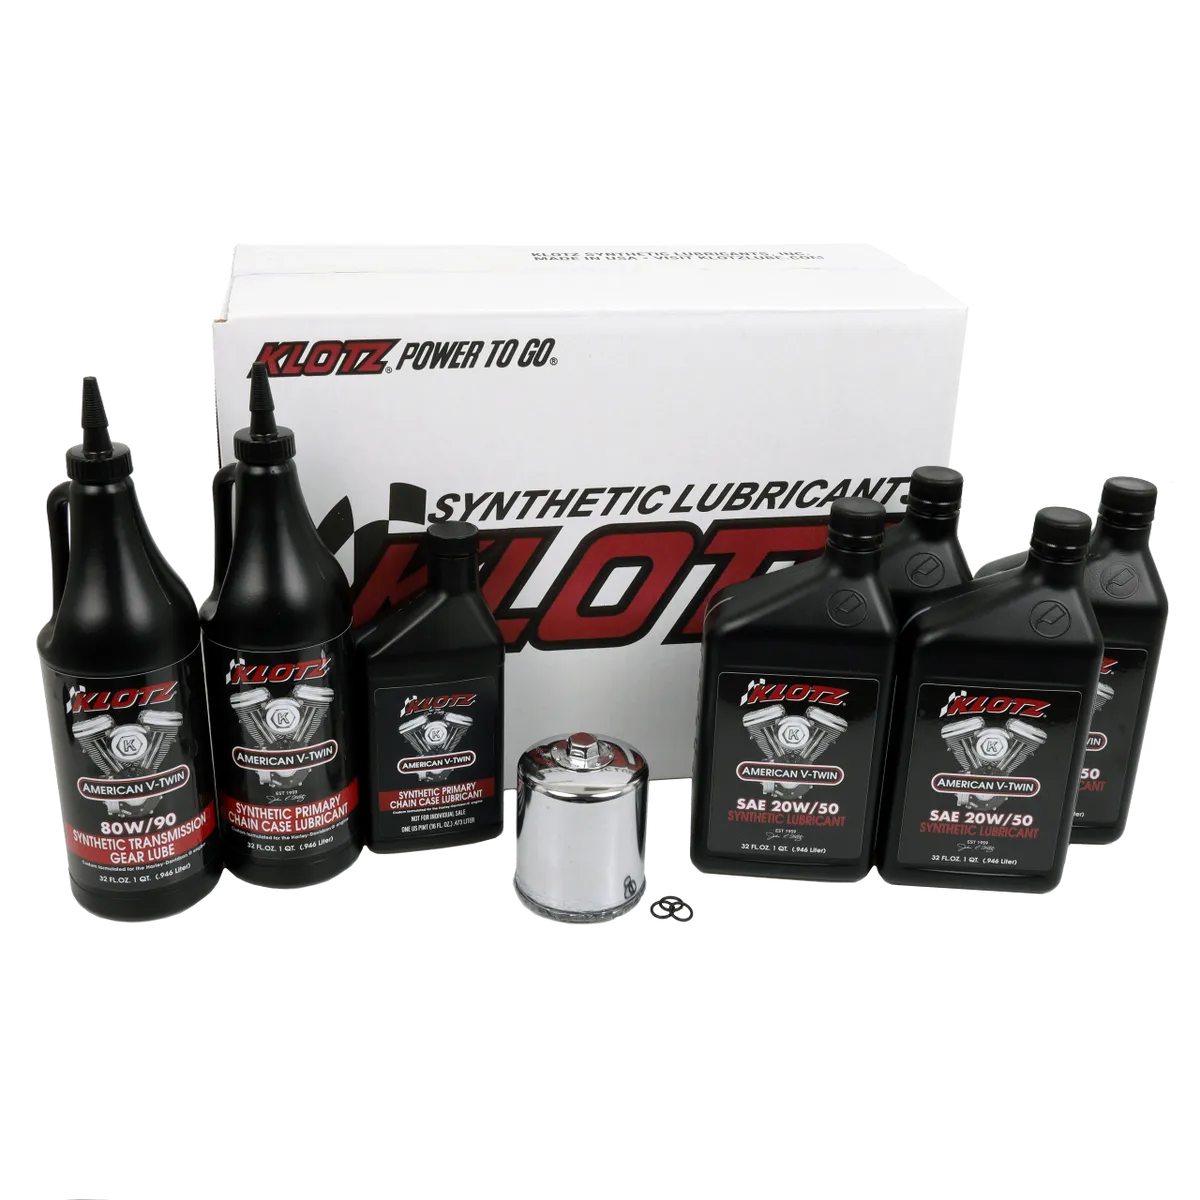 A box with a set of Klotz premium complete oil change kits for Harley-Davidson Big Twin motorcycles (Evolution).

Brand Name: Klotz